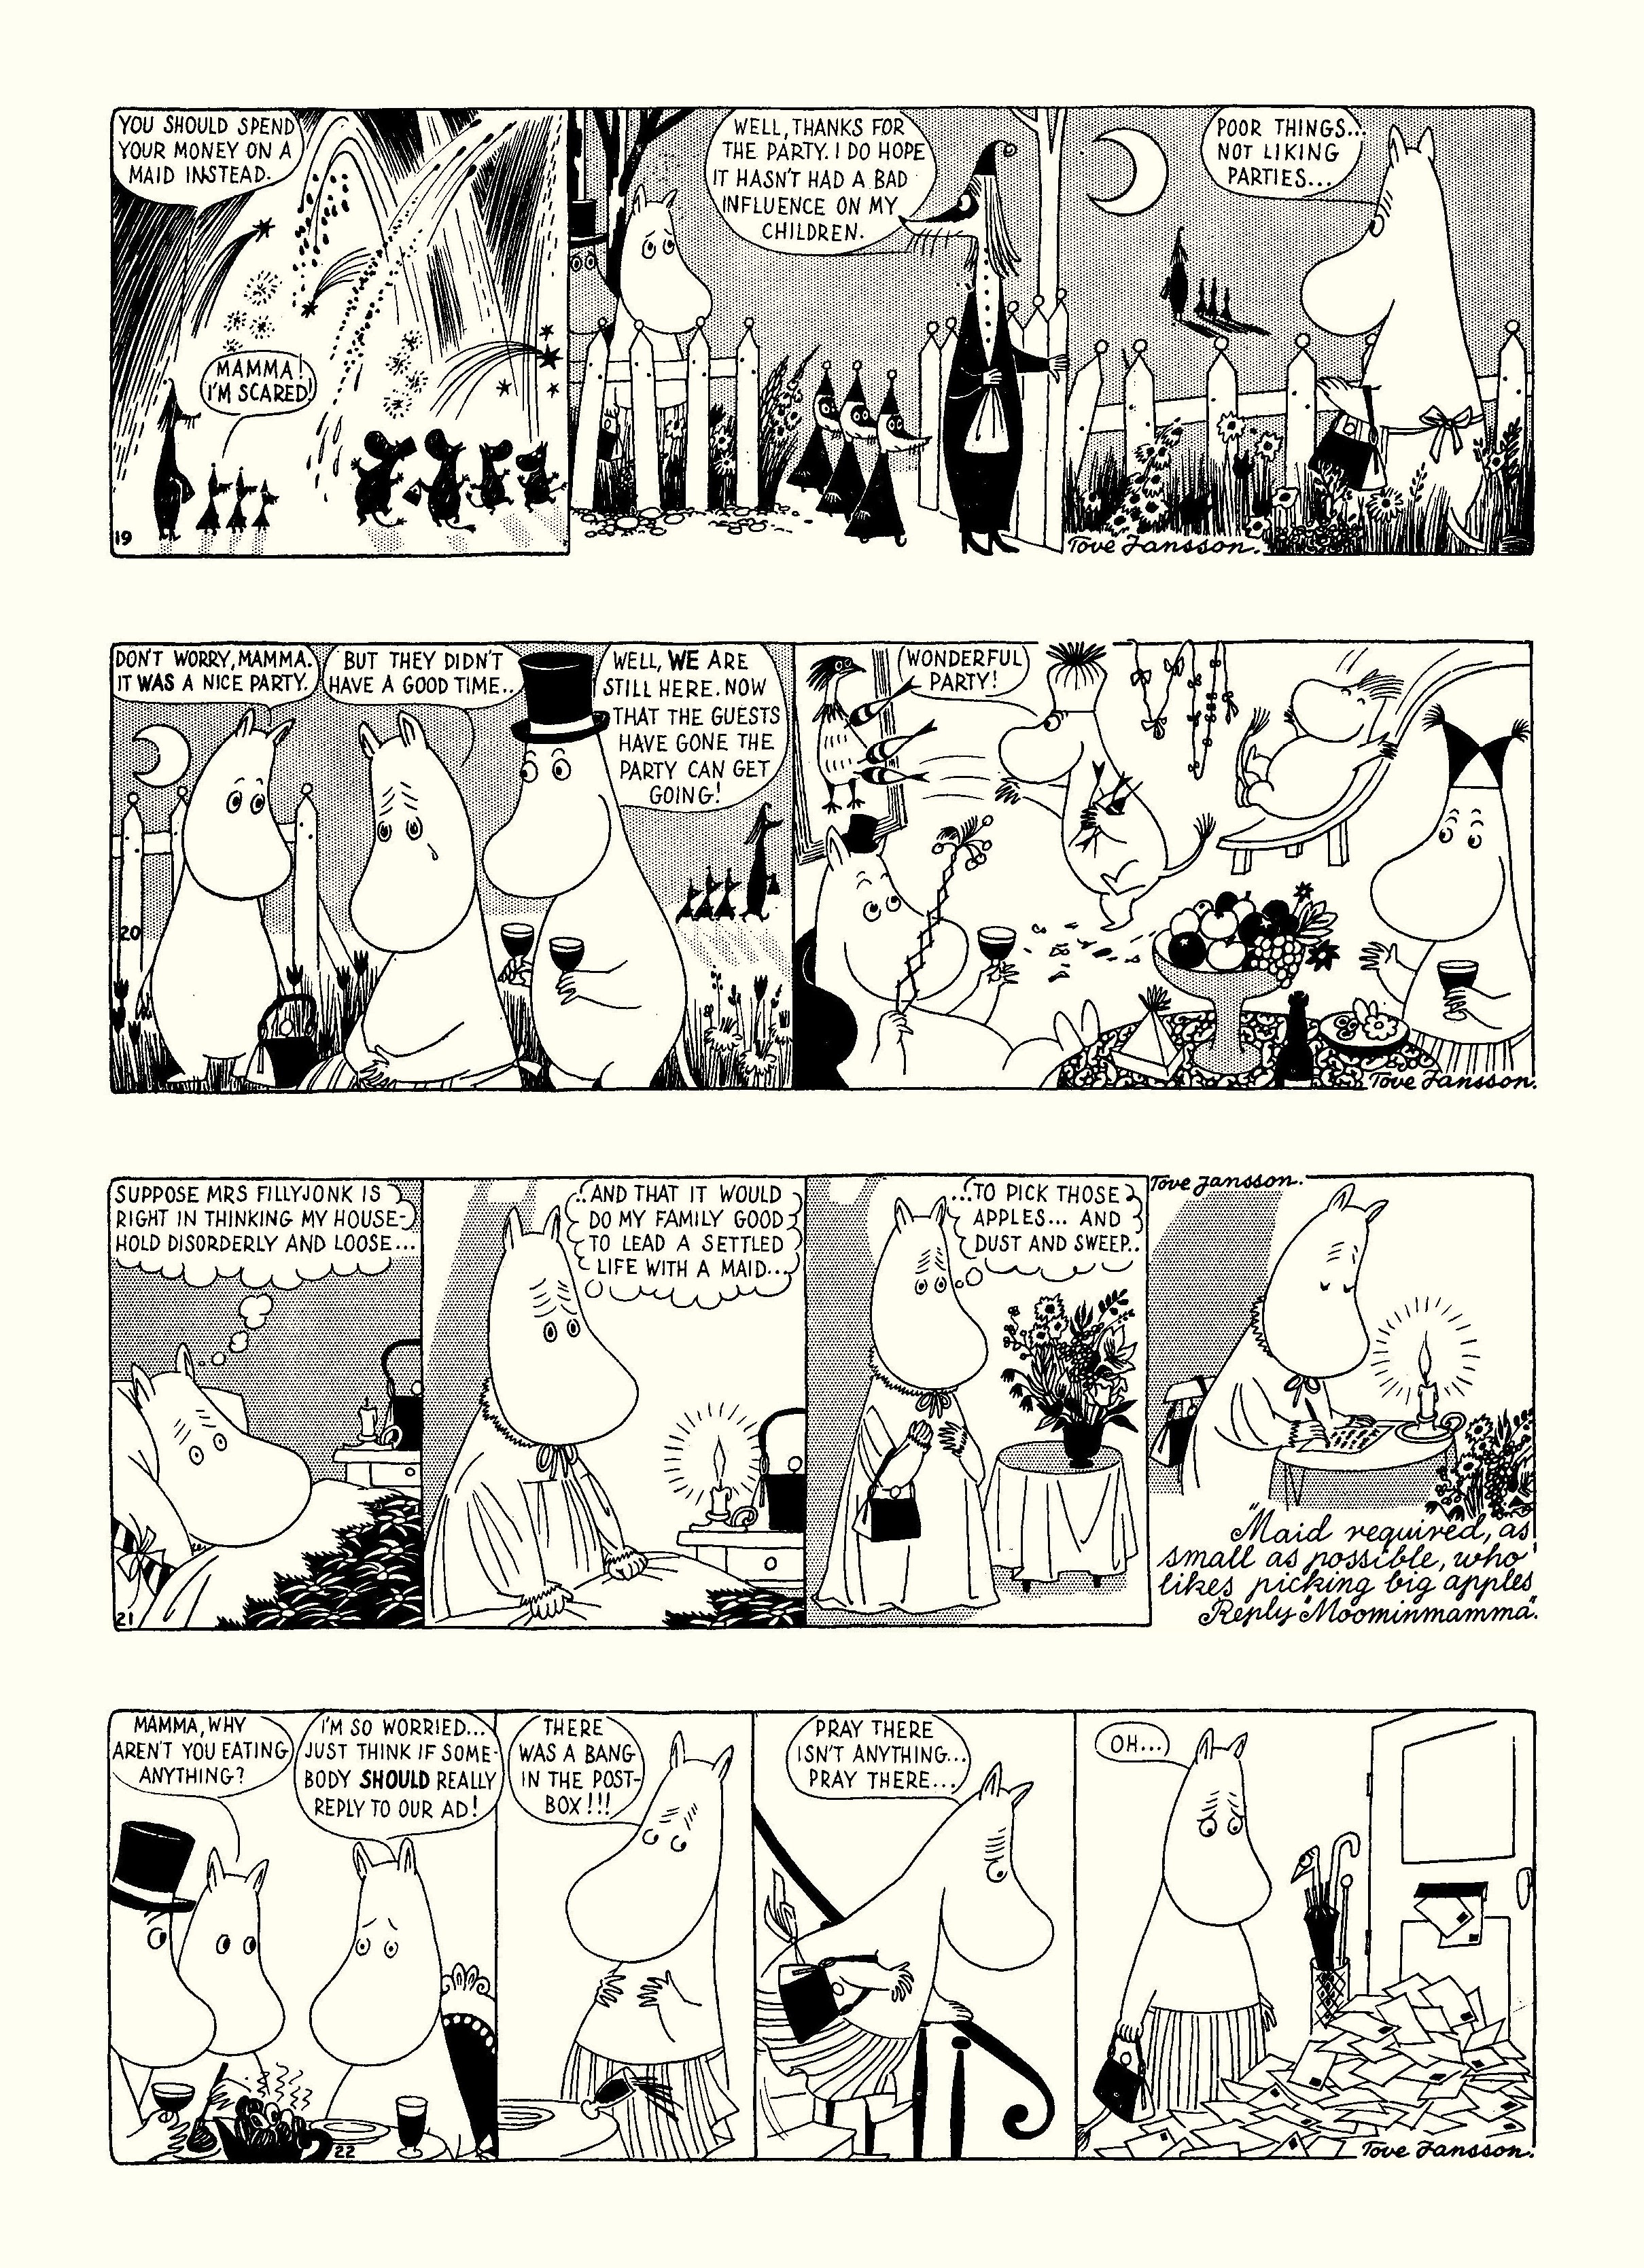 Read online Moomin: The Complete Tove Jansson Comic Strip comic -  Issue # TPB 2 - 32